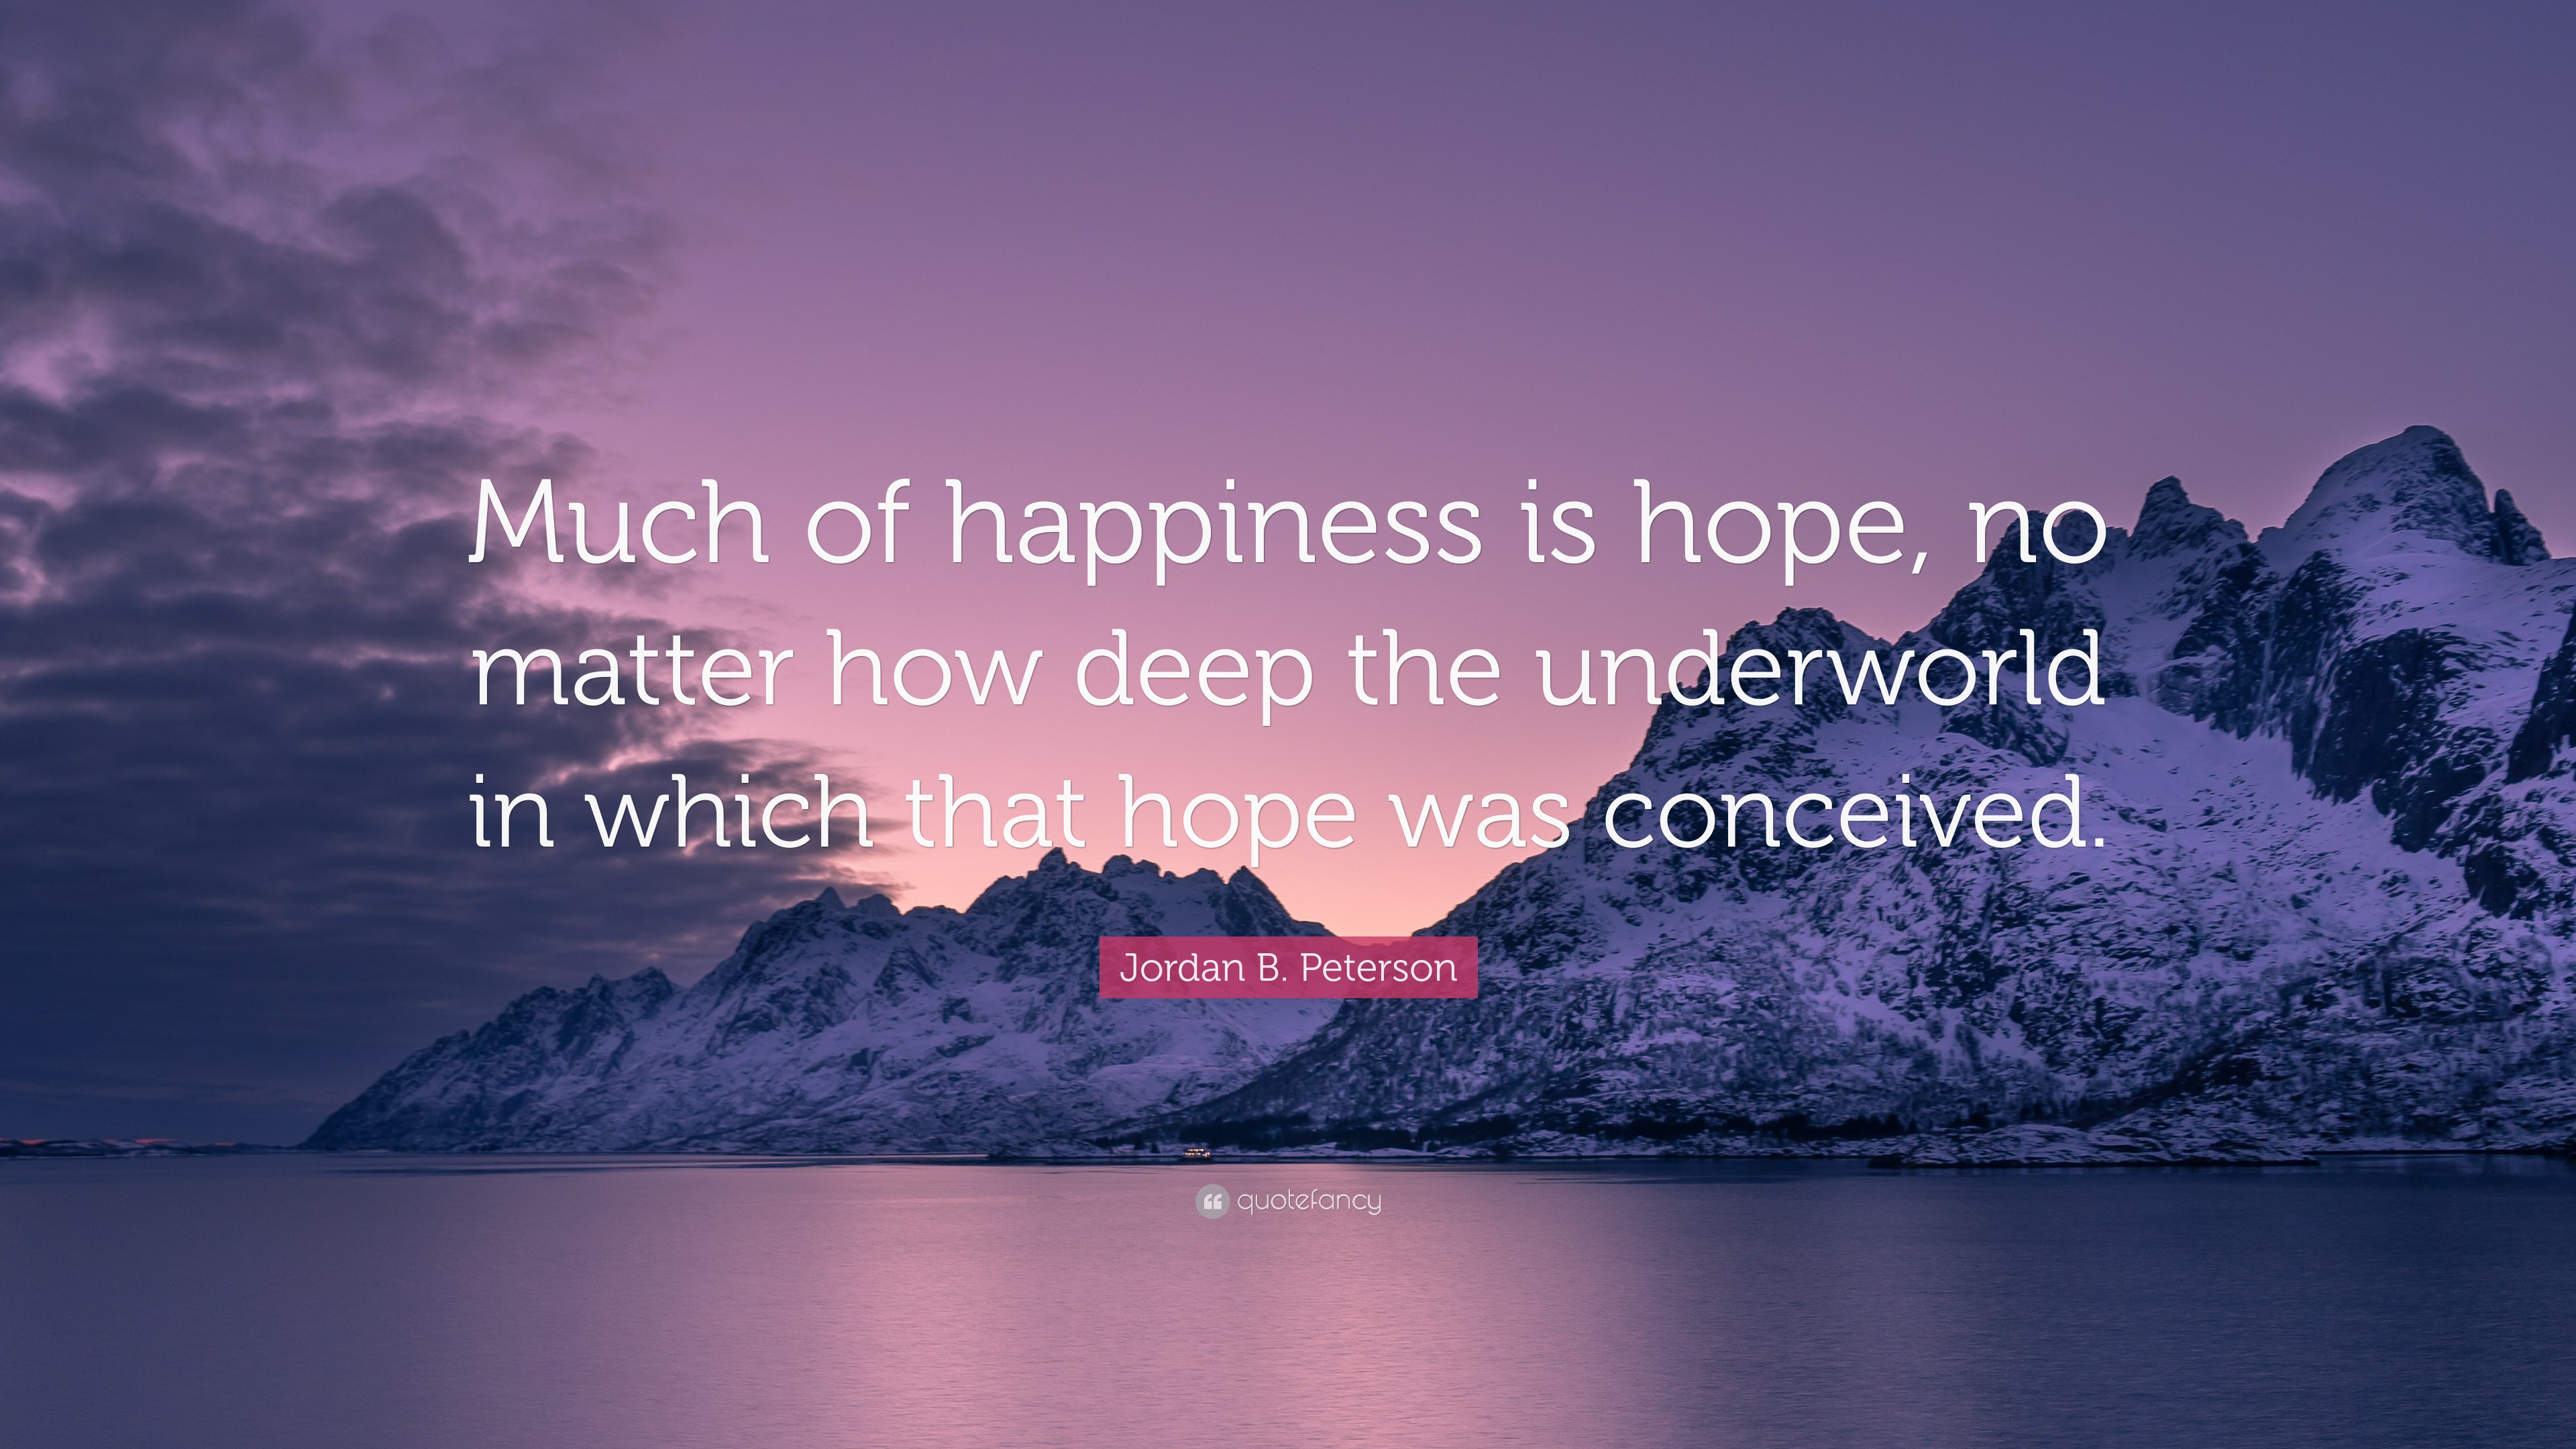 Jordan B. Peterson Quote: “Much of happiness is hope, no matter how deep  the underworld in